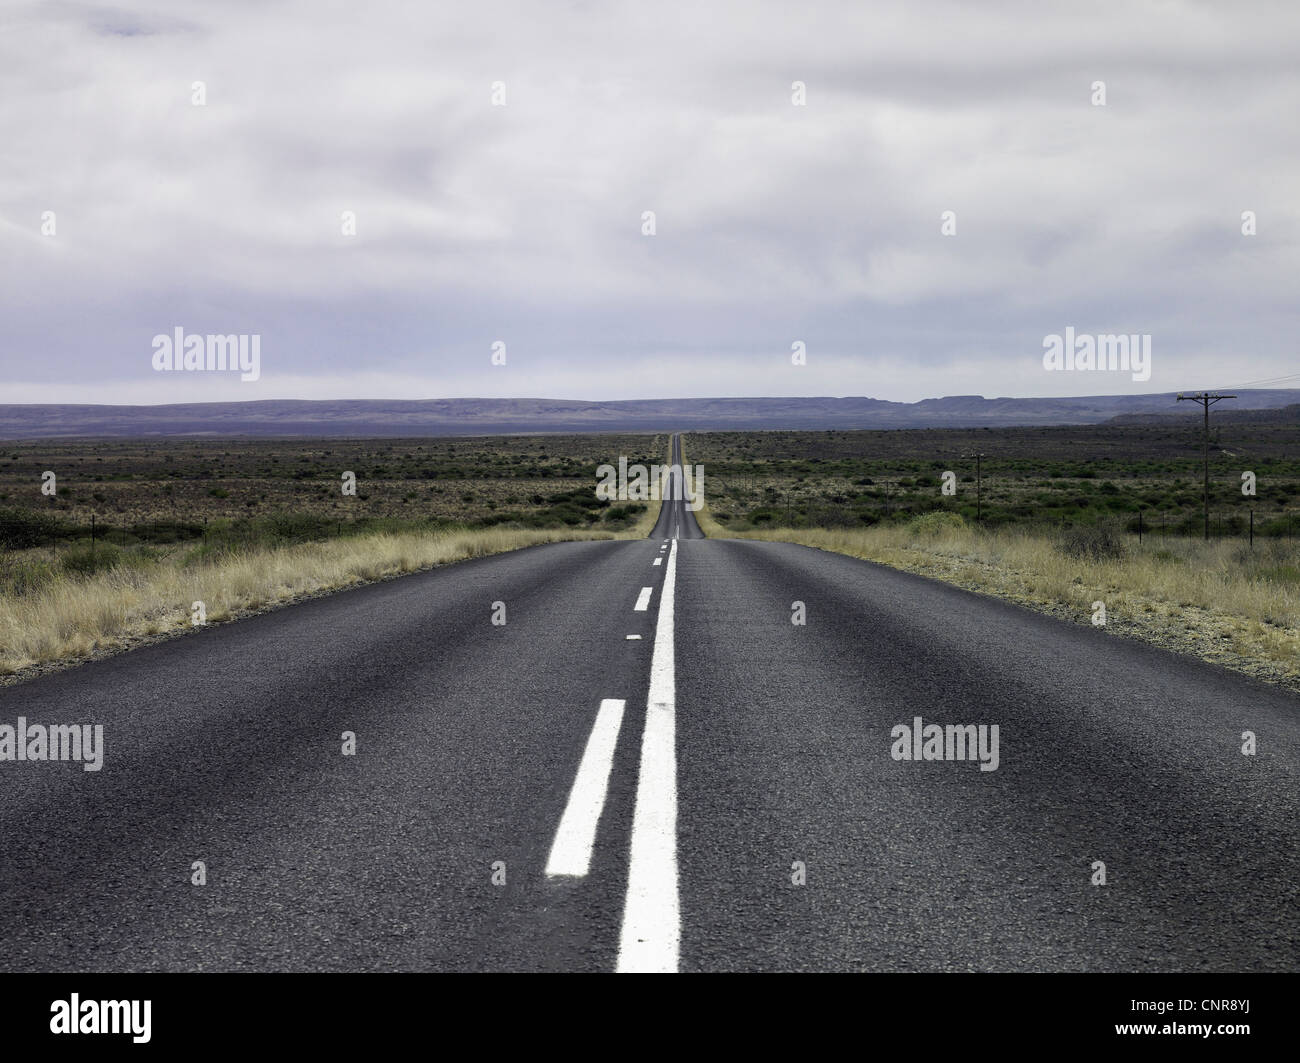 Empty road in dry rural landscape Stock Photo